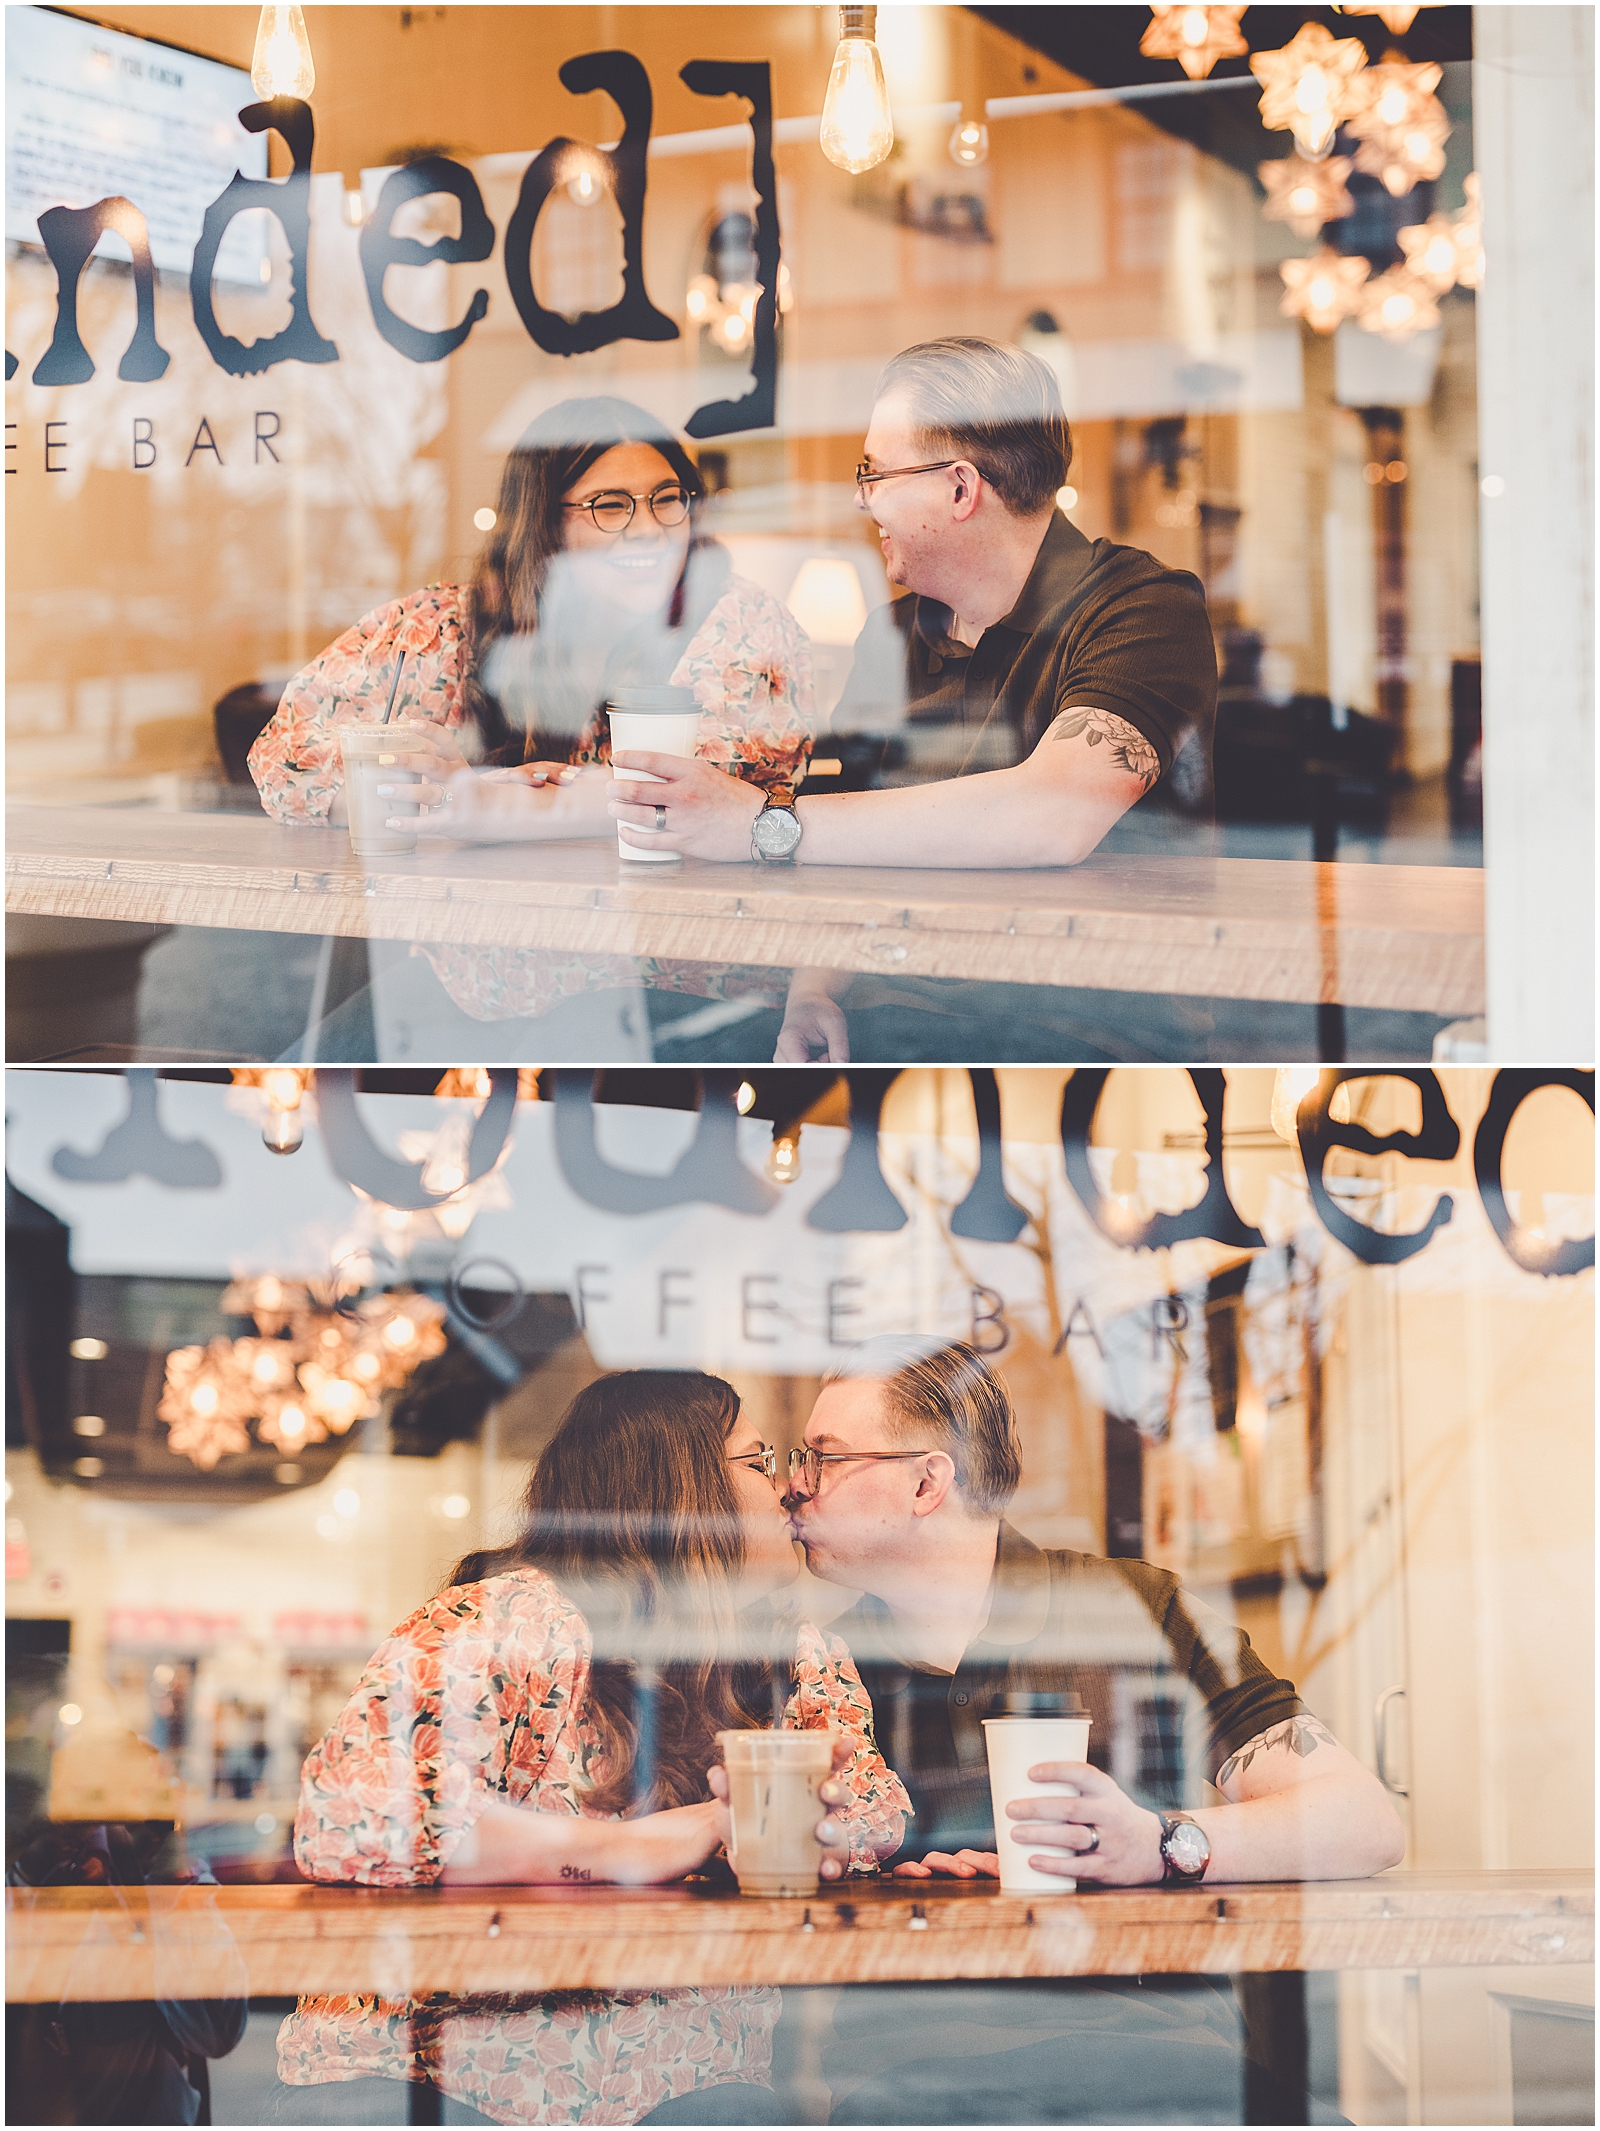 Spring couples session at Grounded Coffee Bar in Frankfort, Illinois with Chicagoland wedding photographer Kara Evans Photographer.